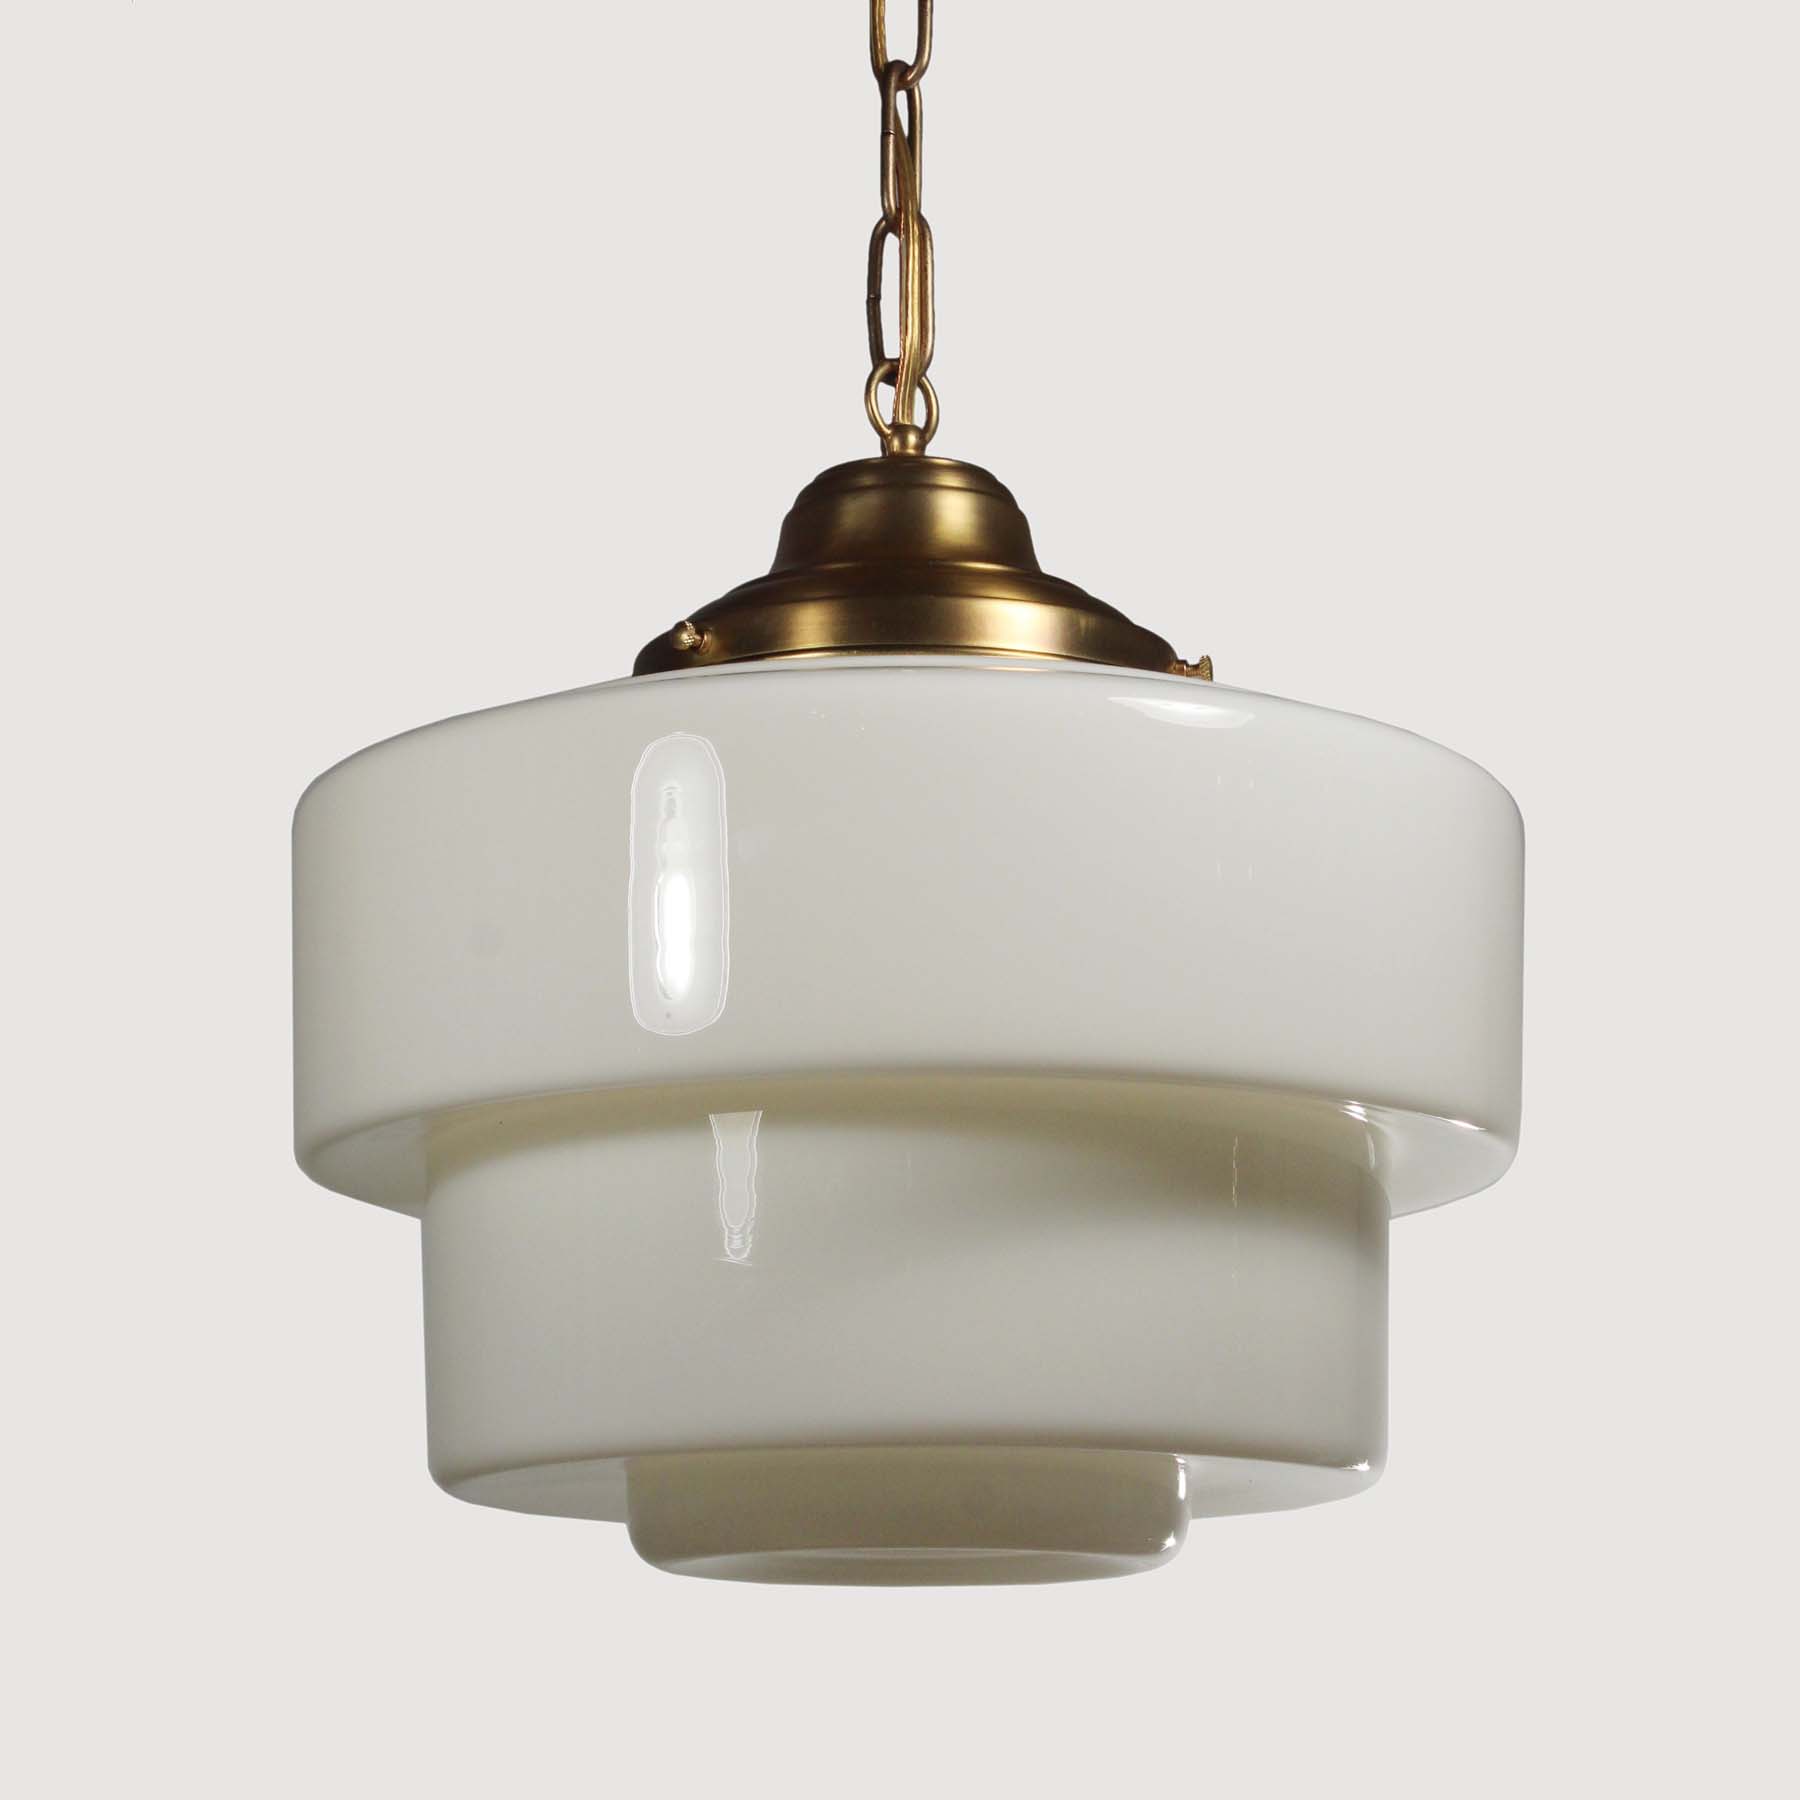 SOLD Antique Schoolhouse Pendant Light with Unusual Shade-67680